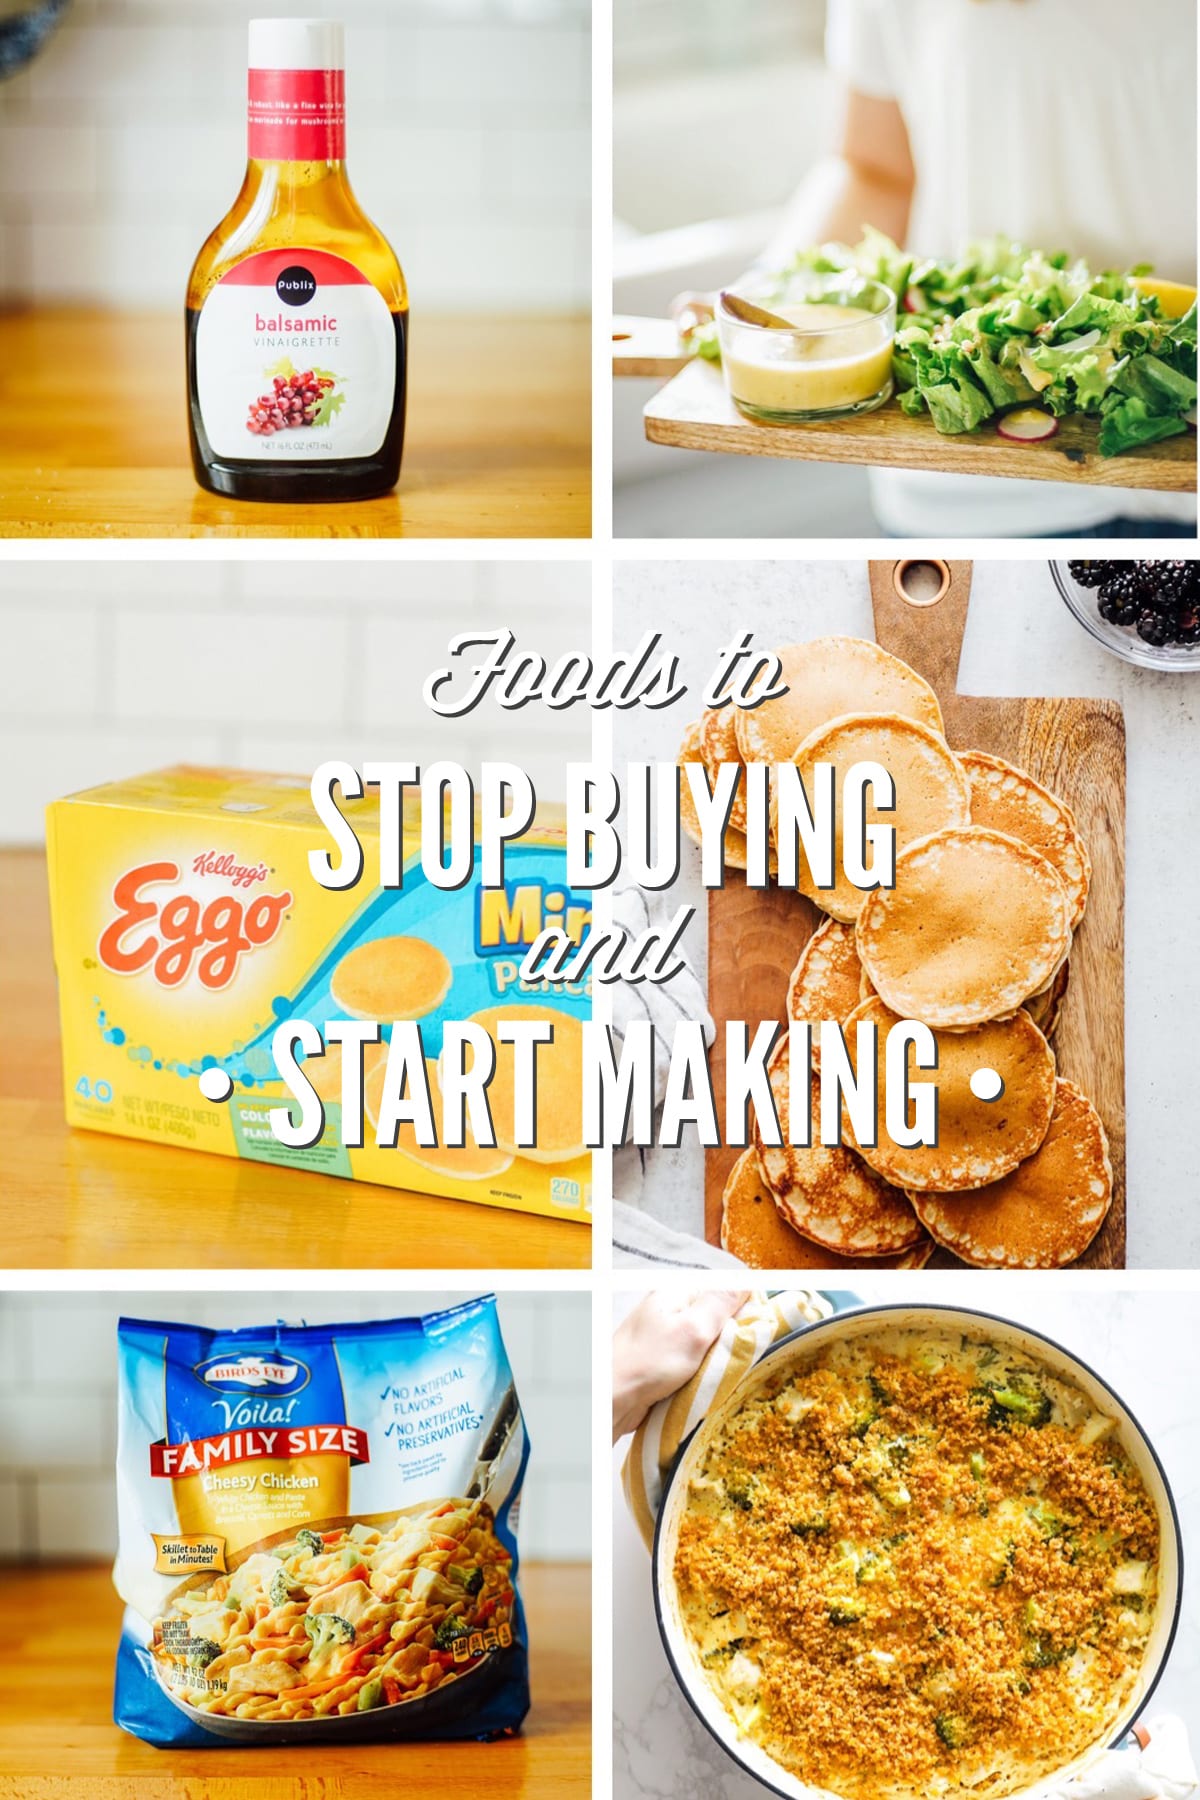 7 Processed Foods to Stop Buying and Start Making